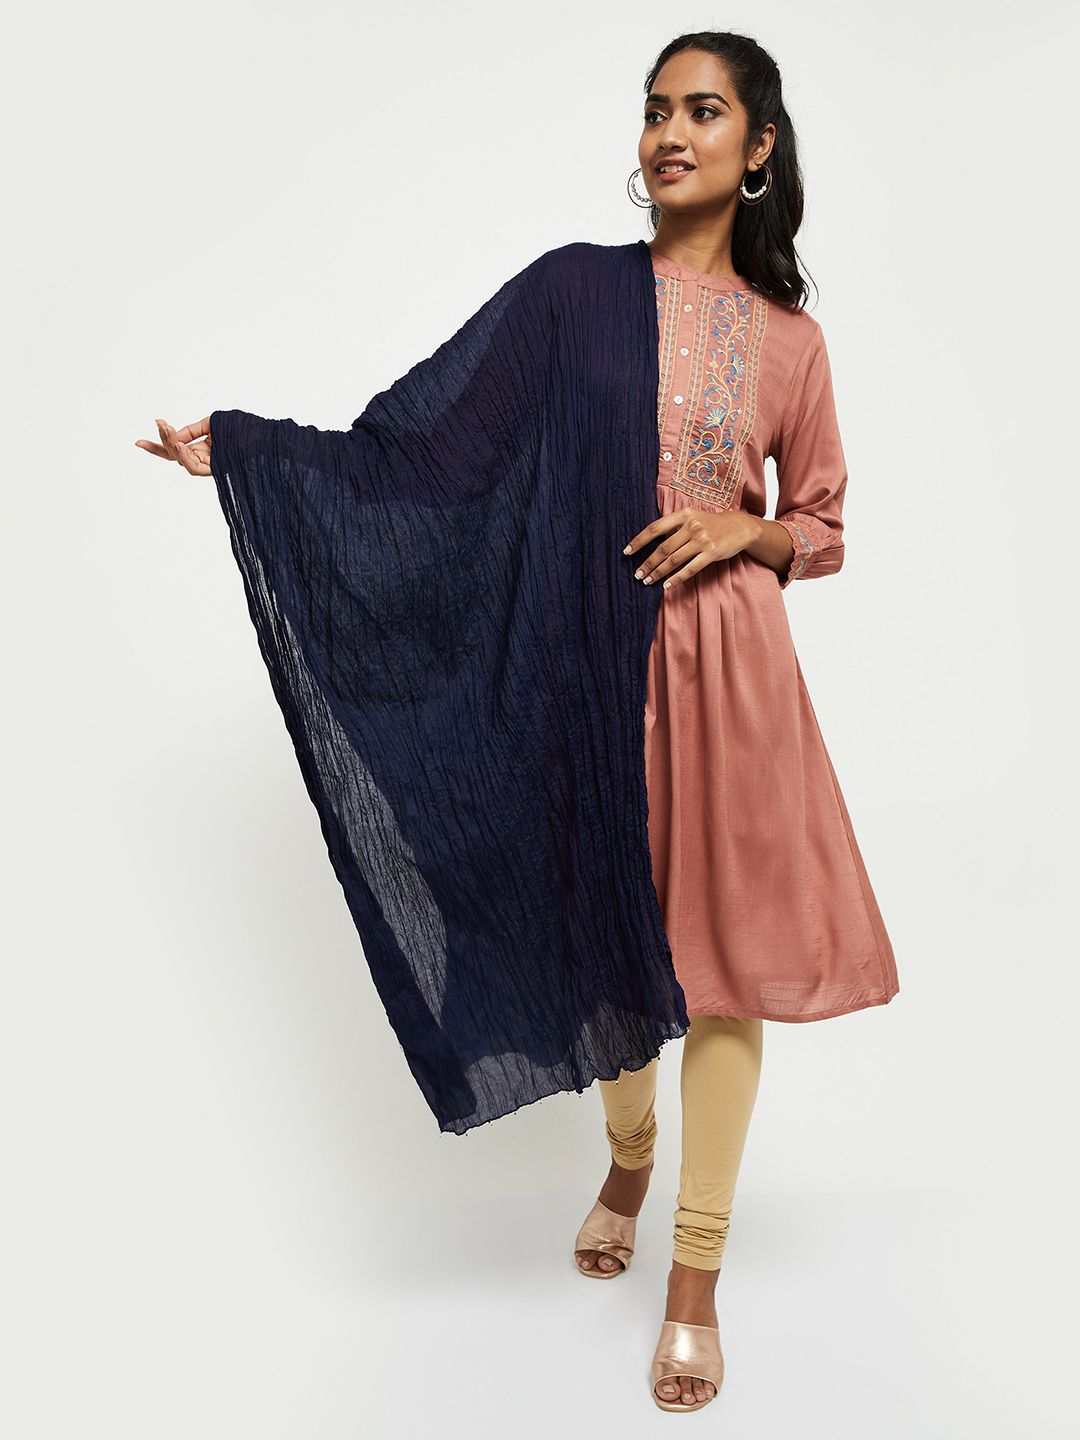 max Navy Blue Pure Cotton Dupatta with Tasselled Border Price in India